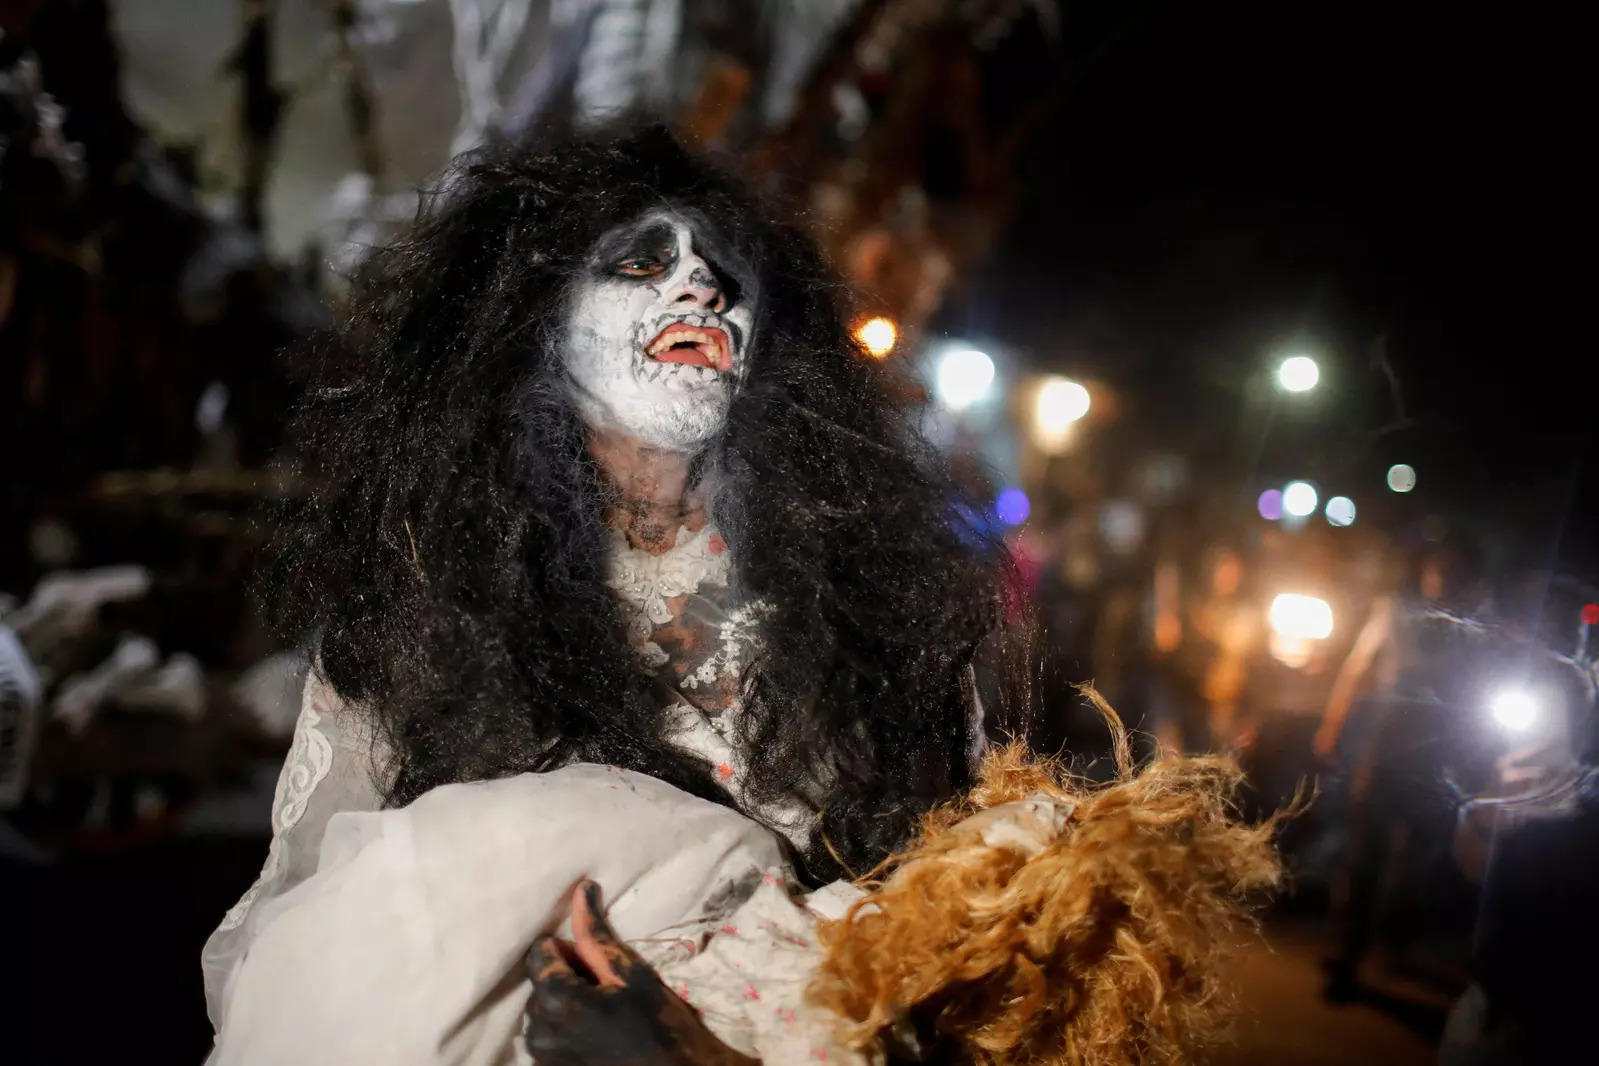 Day of the Dead: These images capture the celebration of traditional festival